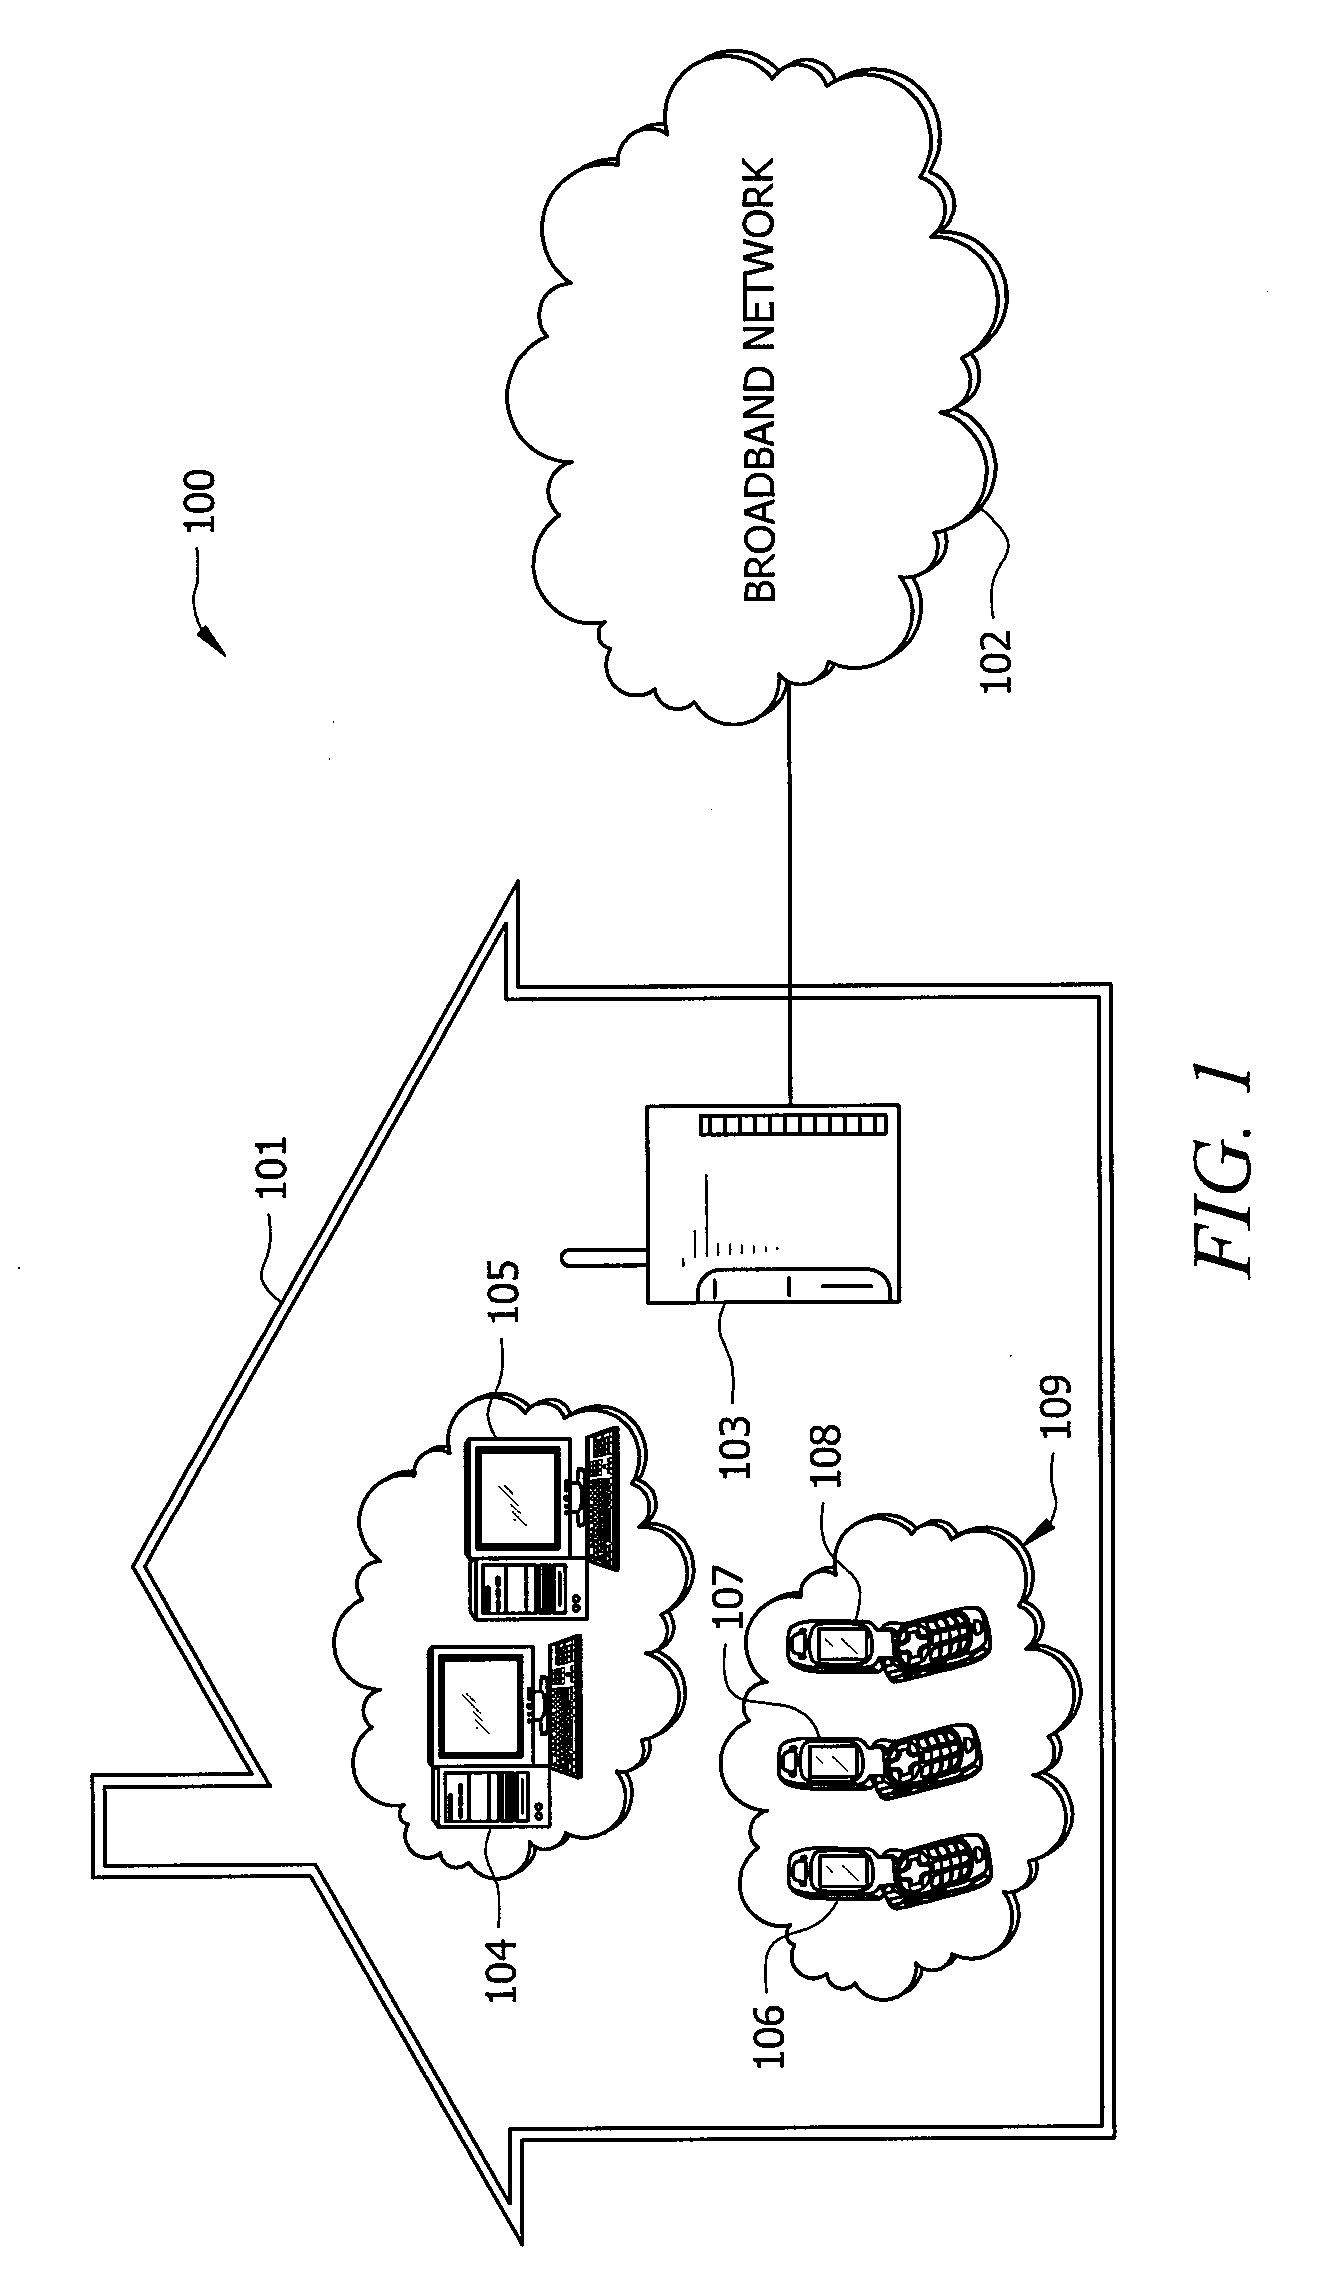 System and method for creating a secure billing identity for an end user using an identity association